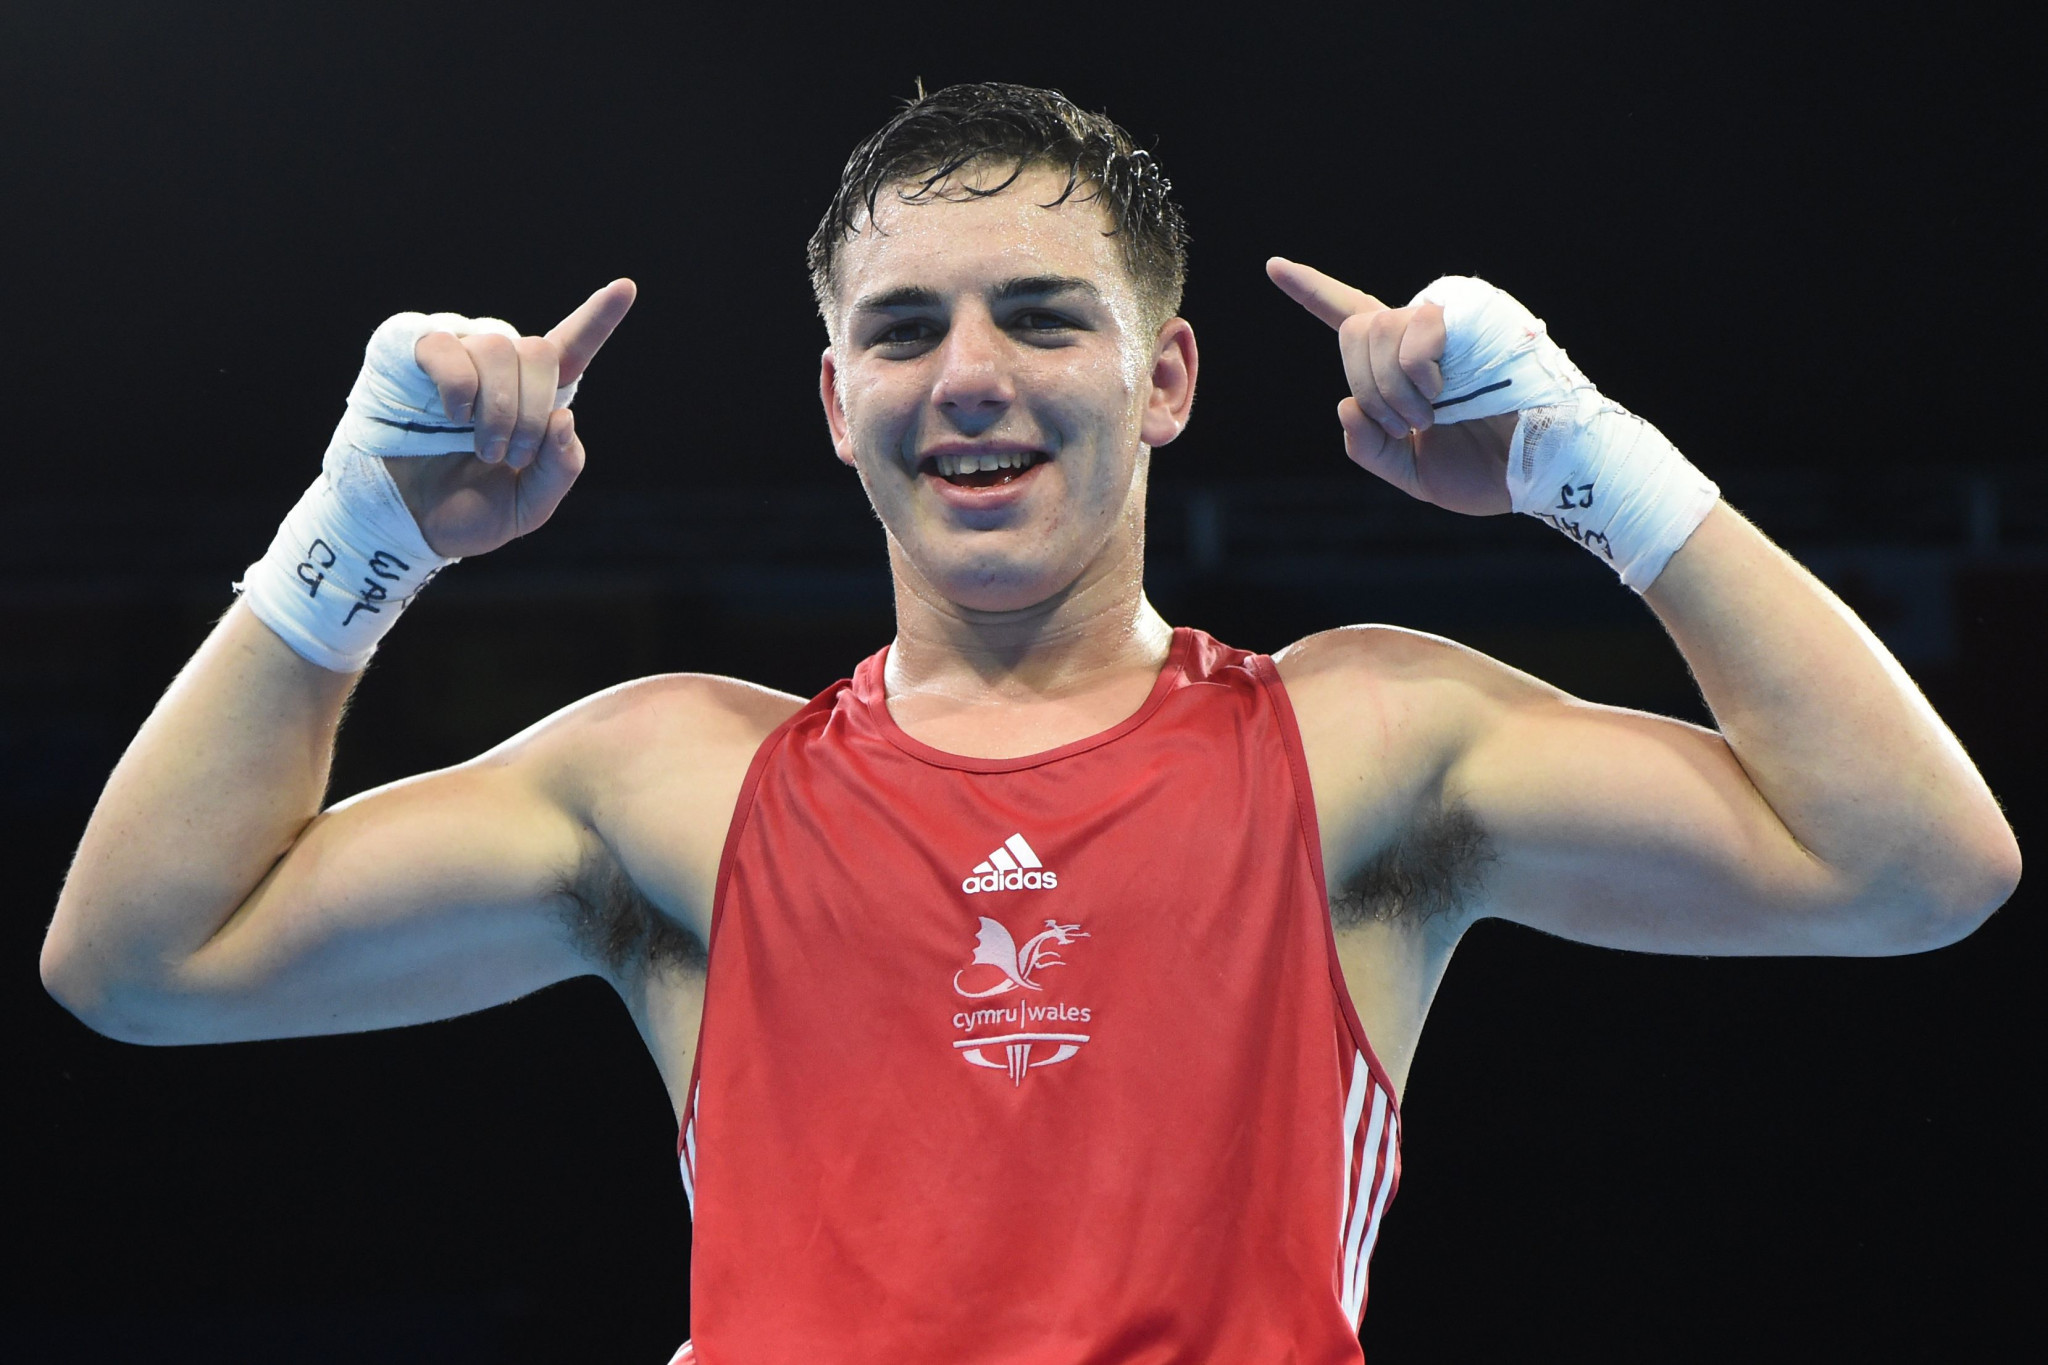 Commonwealth Games champion Lee secures opening round win at AIBA World Championships